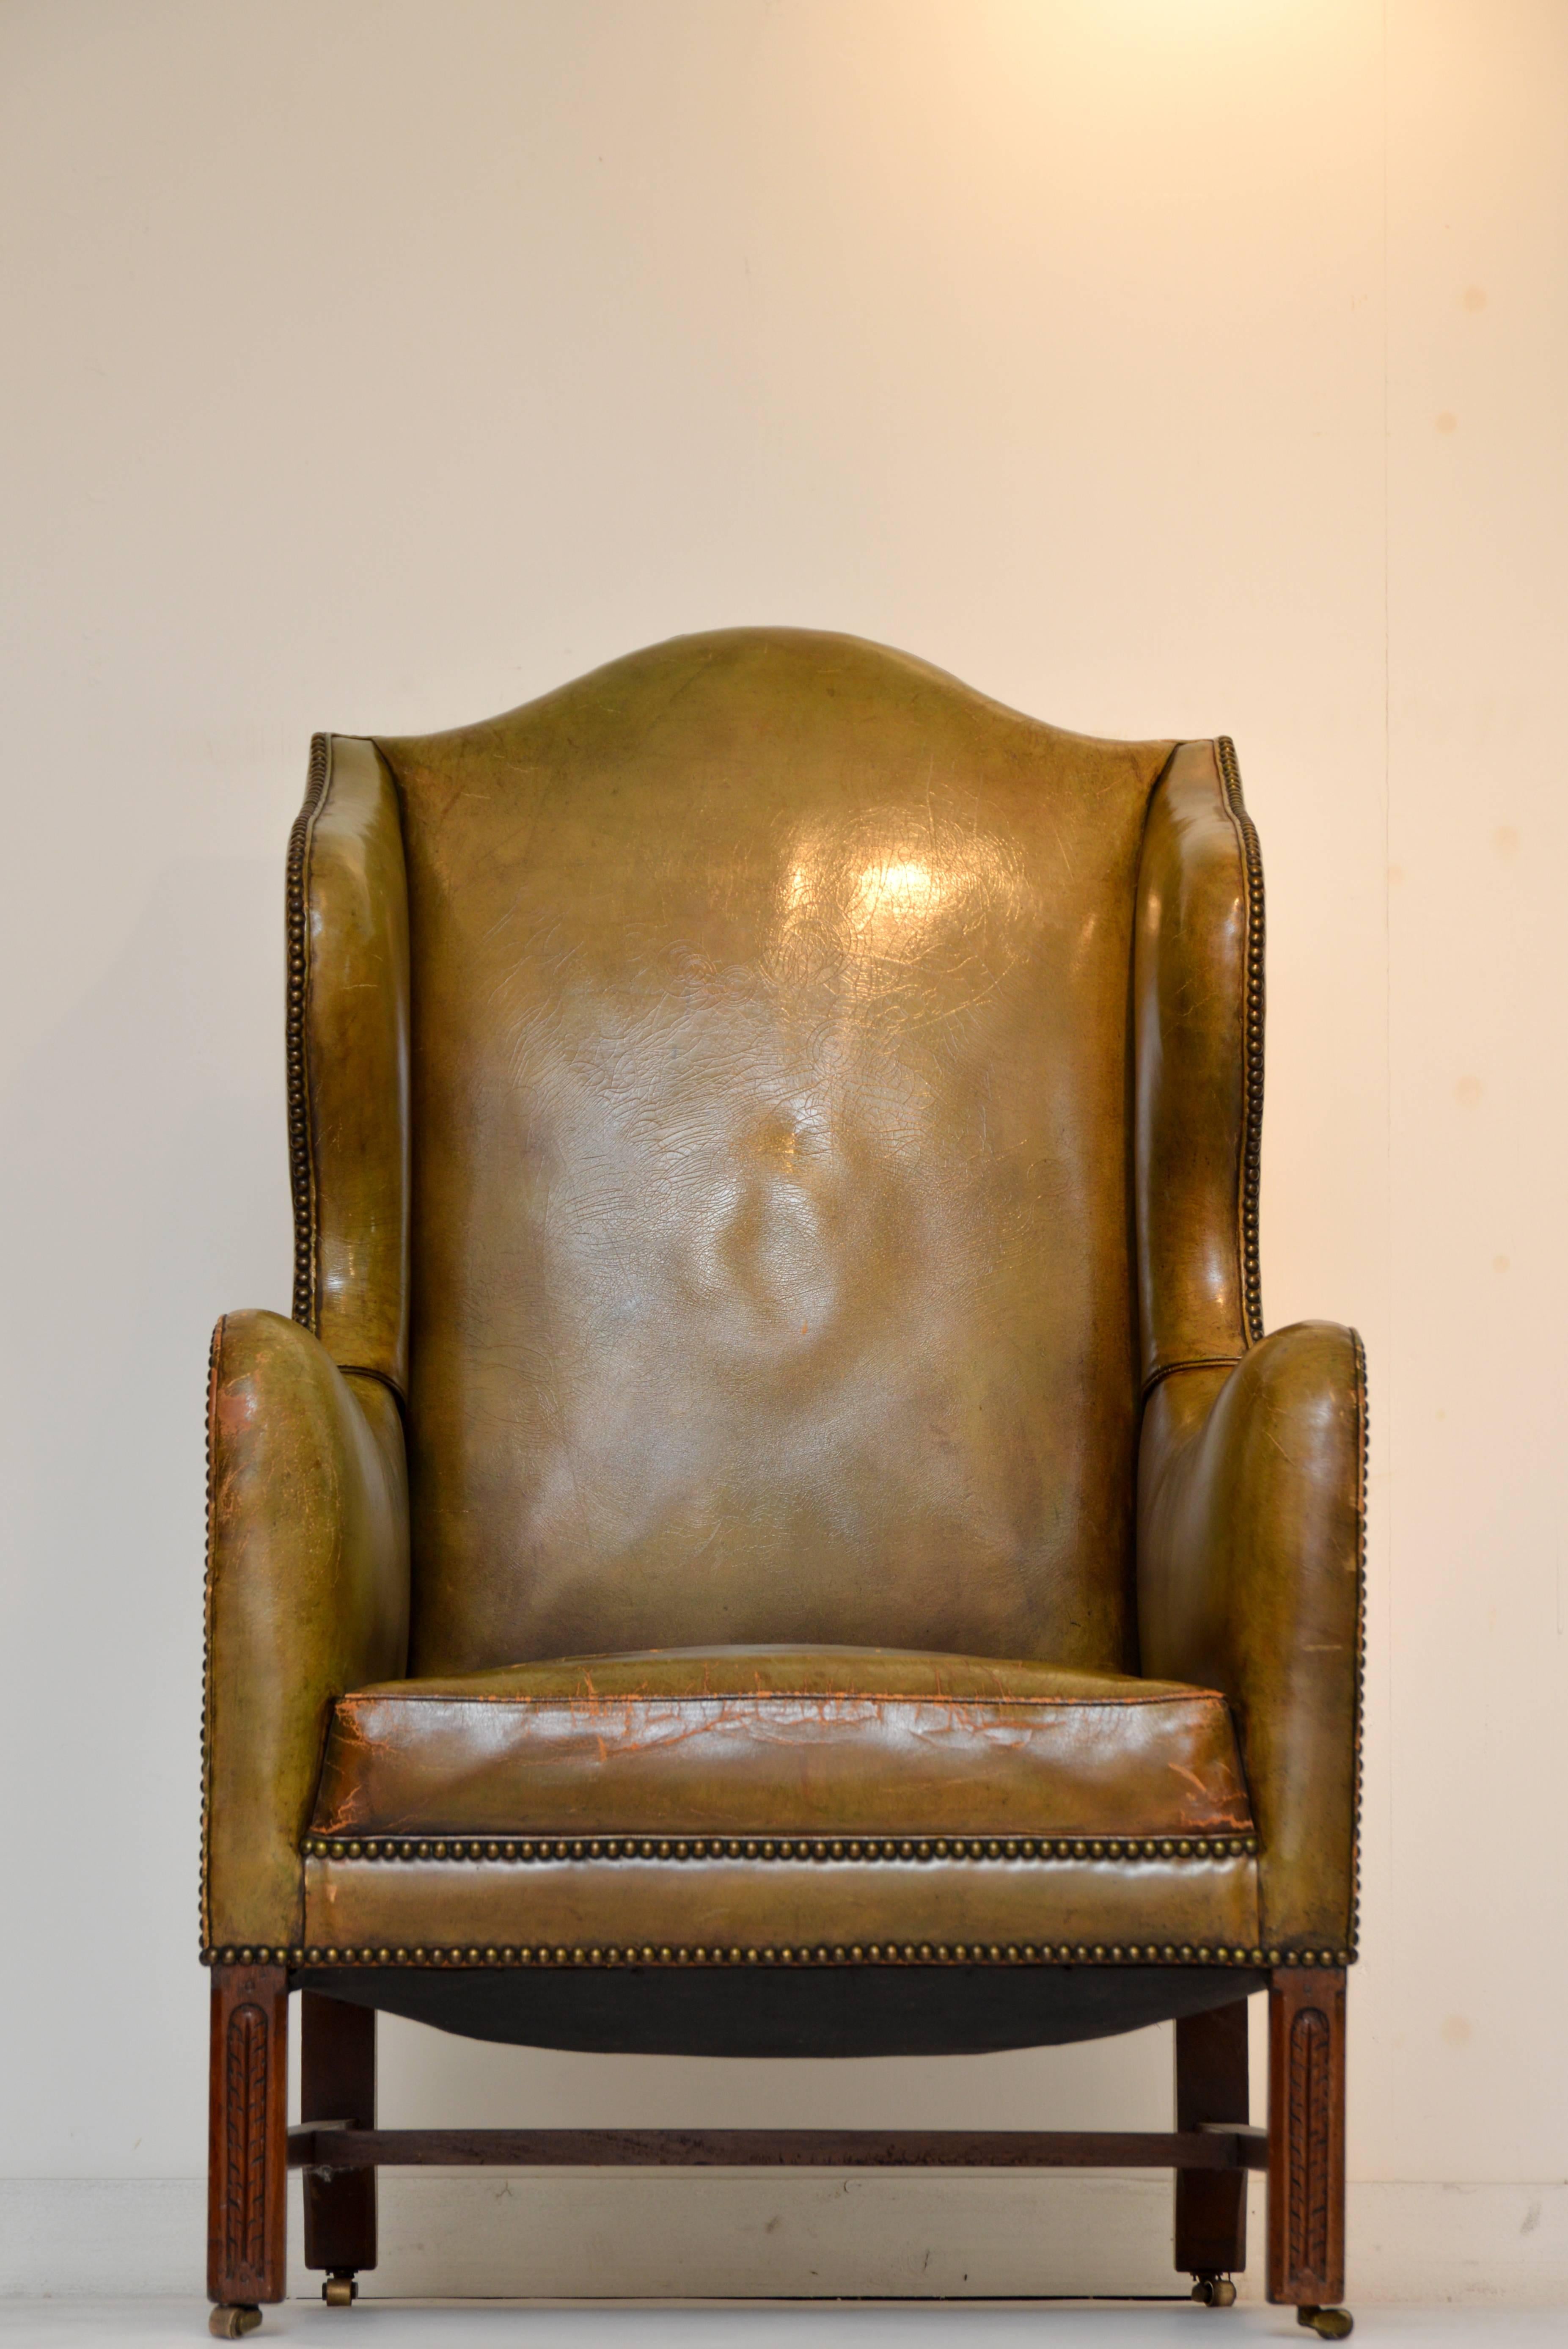 Vintage green leather wing chair with the right amount of rich patina which can only be created from many years of use.